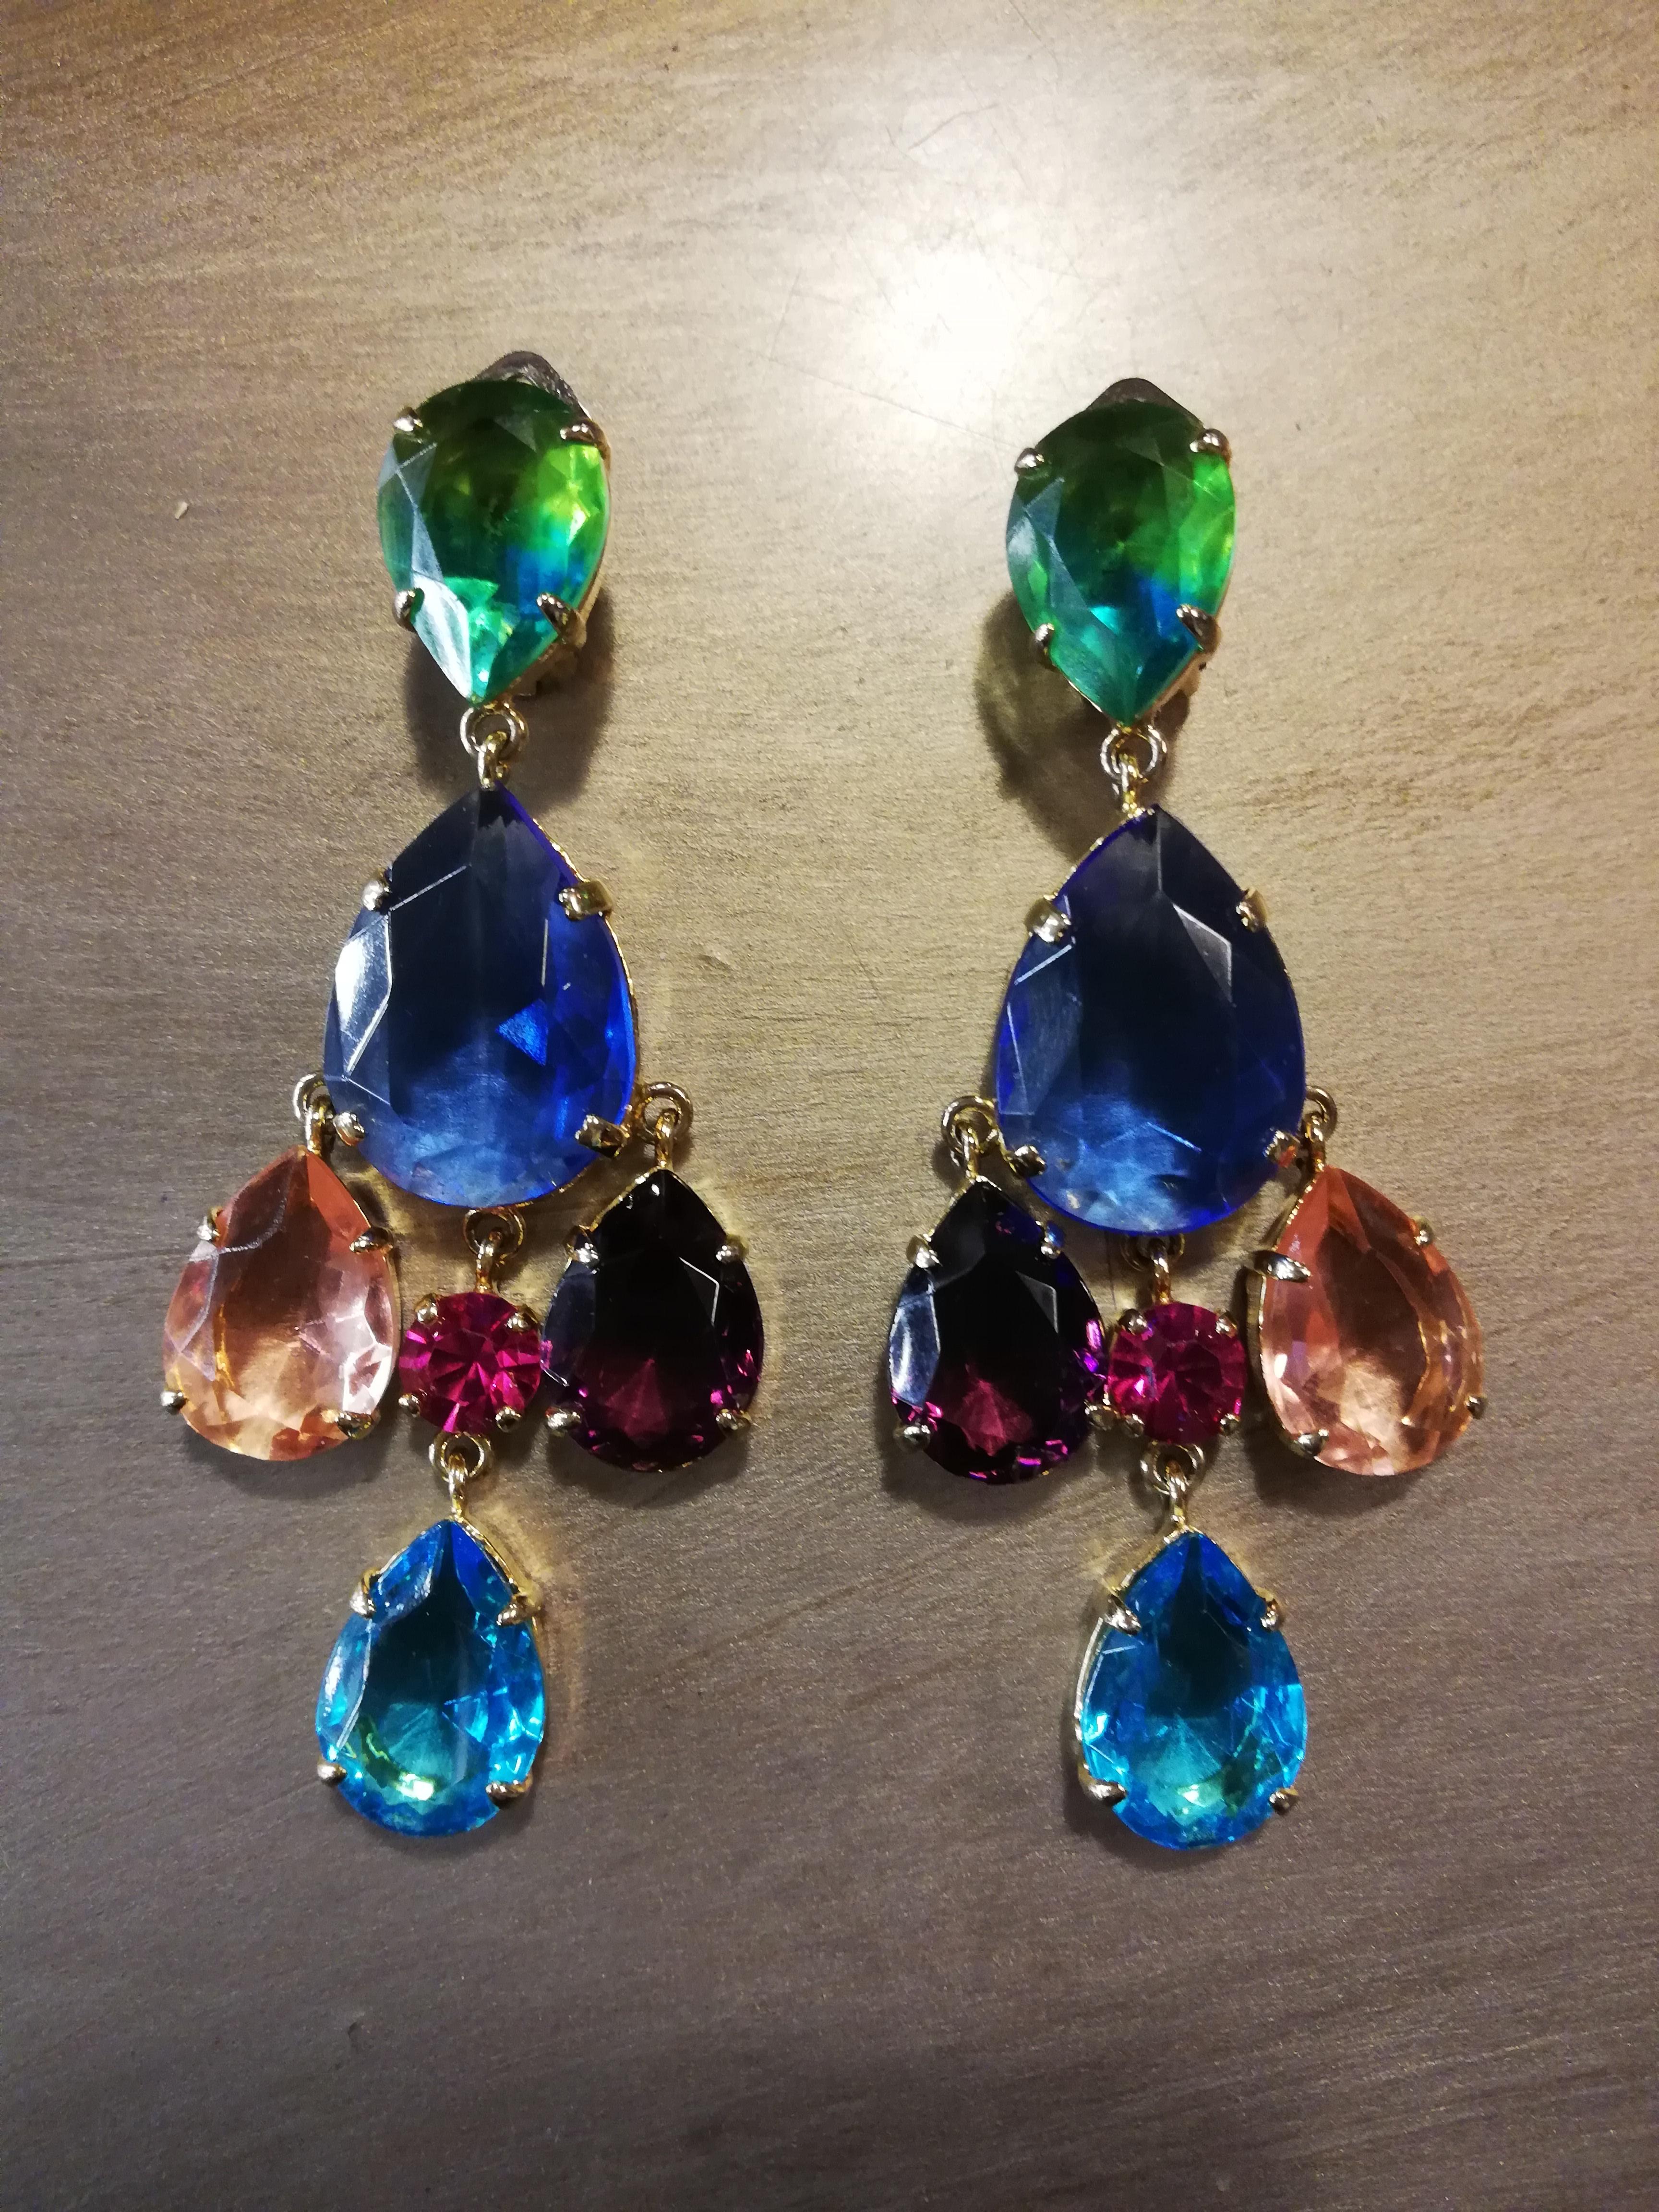 Fantastic earrings by Carlo Zini
Non allergenic rhodium
18 KT gold dipped
Amazing combinations of colored crystals 
Clip on closure, pierced on request
Length cm 8 (3.14 inches)
100% Artisanal work, made in Milan
Worldwide express shipping included